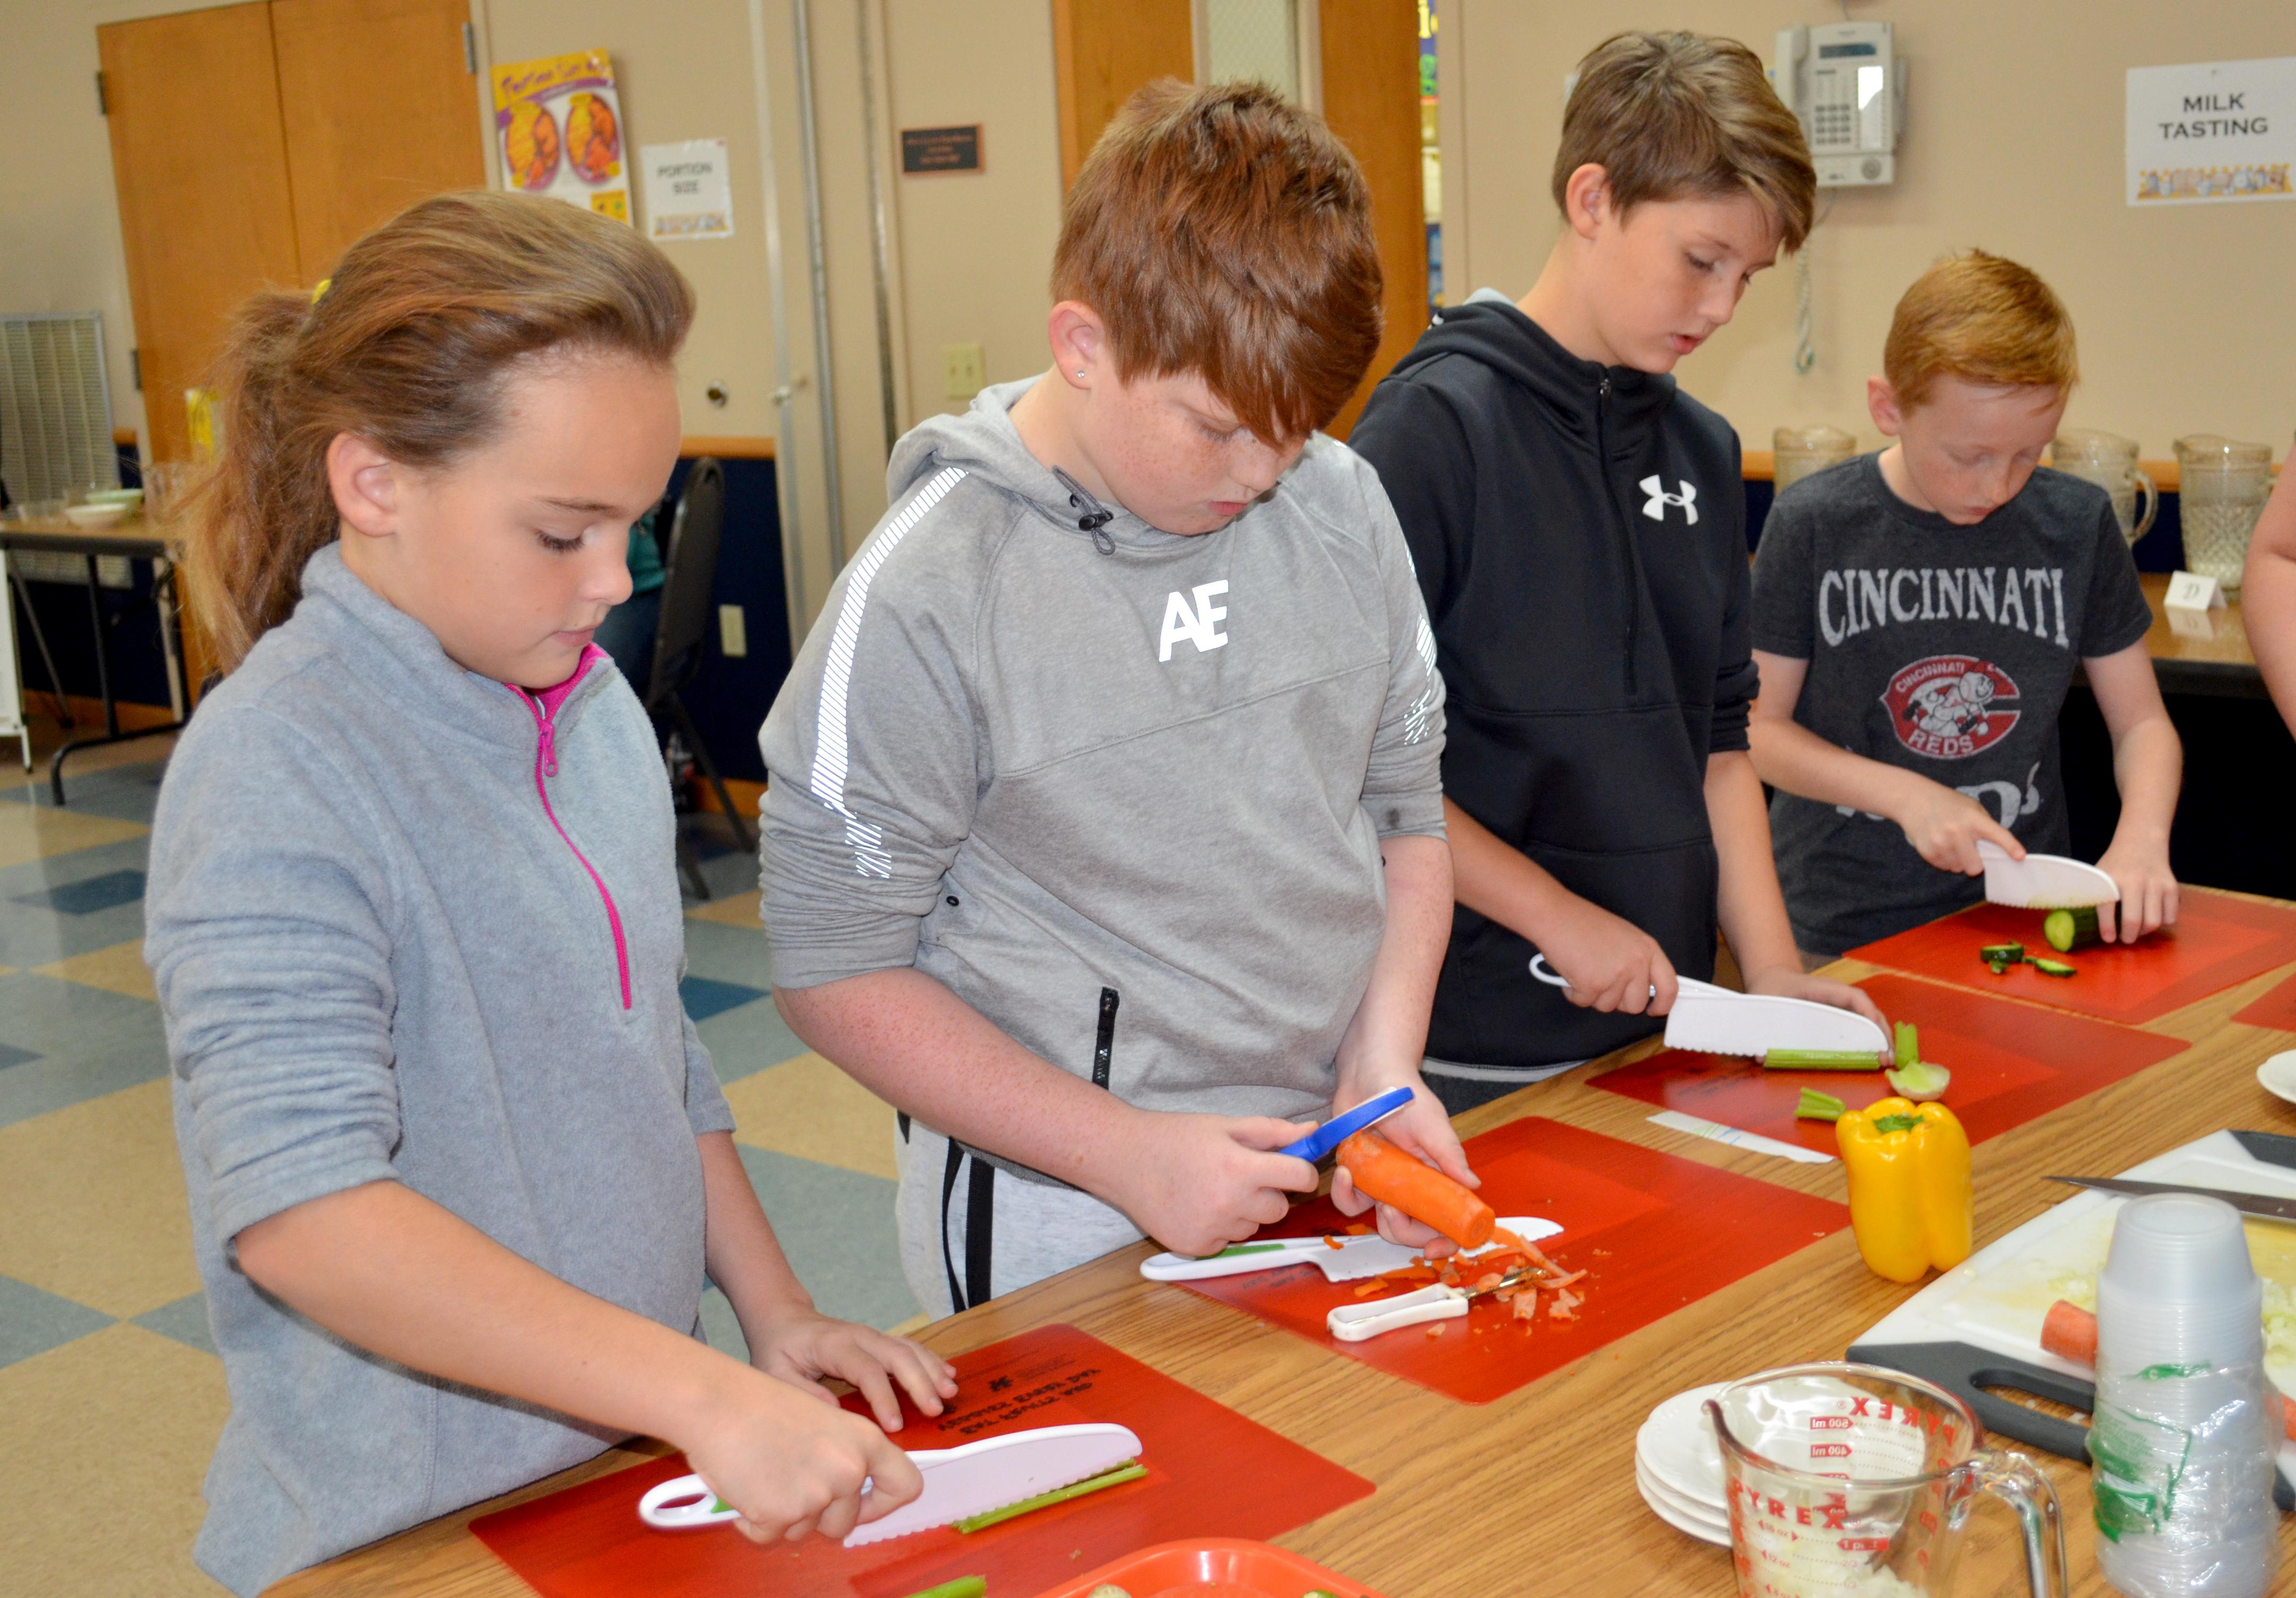 Owen County fifth-graders chop up vegetable appetizers during the Recipes for Life Program. Photo by Katie Pratt, UK agricultural communications.